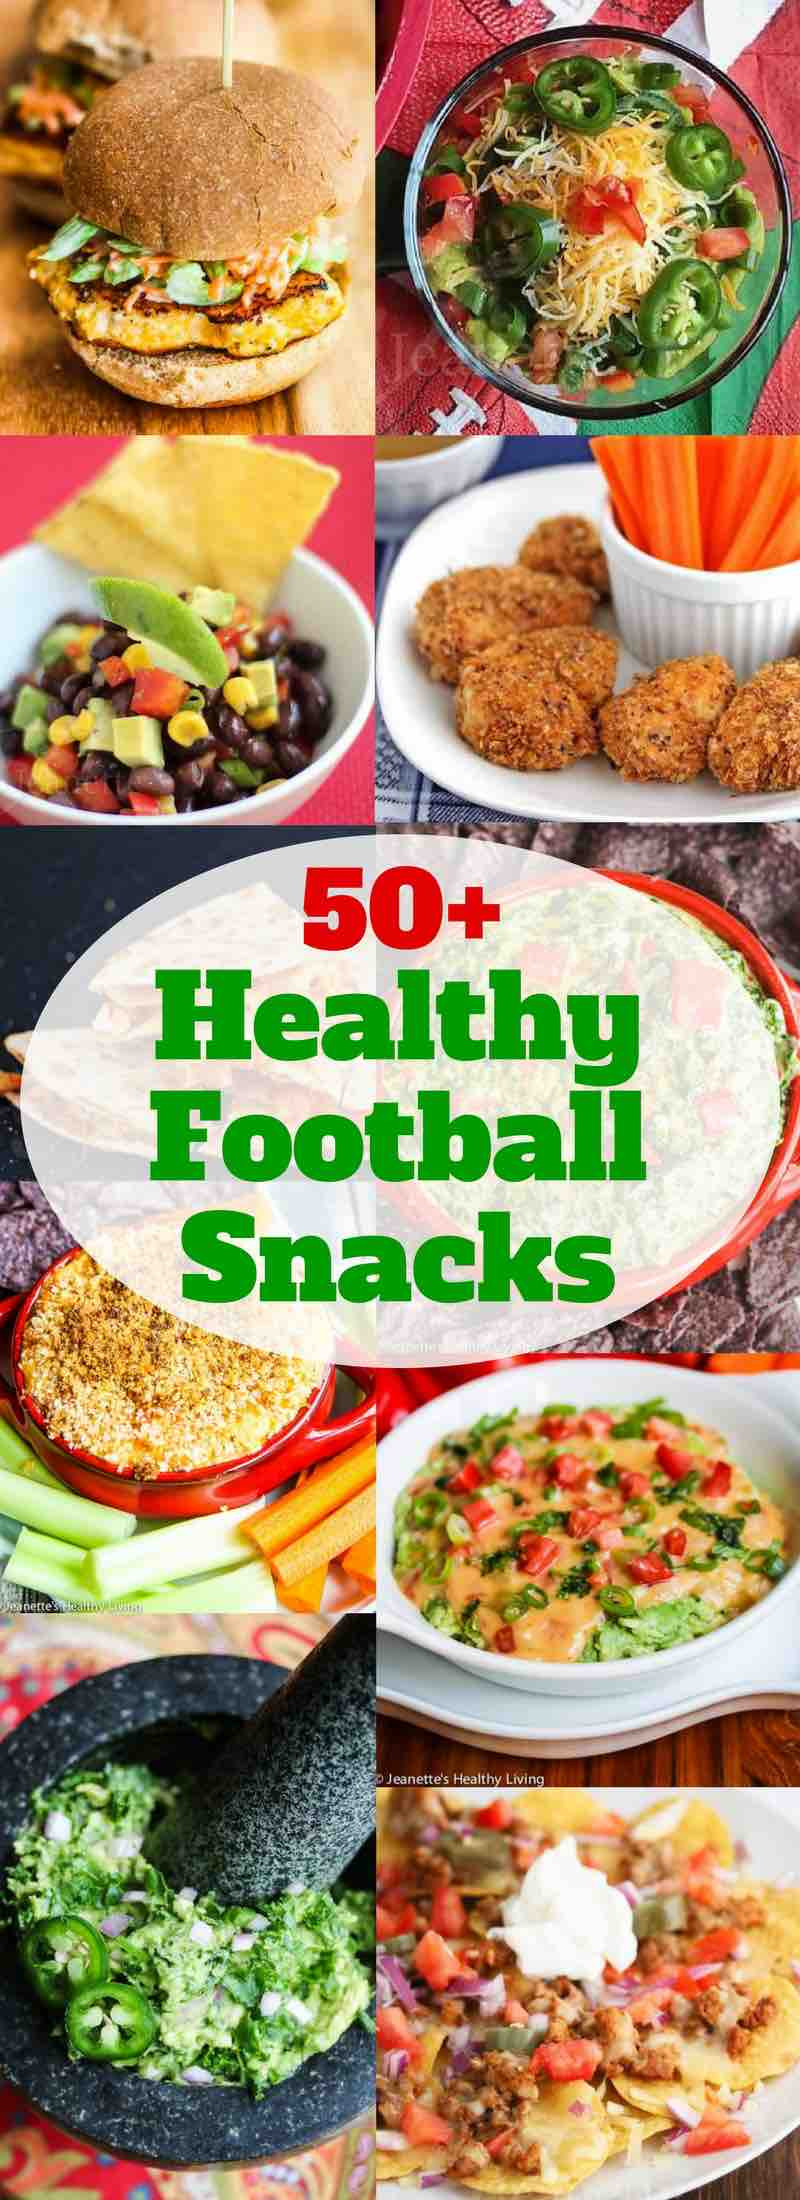 Healthy Football Snacks the Best 50 Healthy Football Snacks Jeanette S Healthy Living